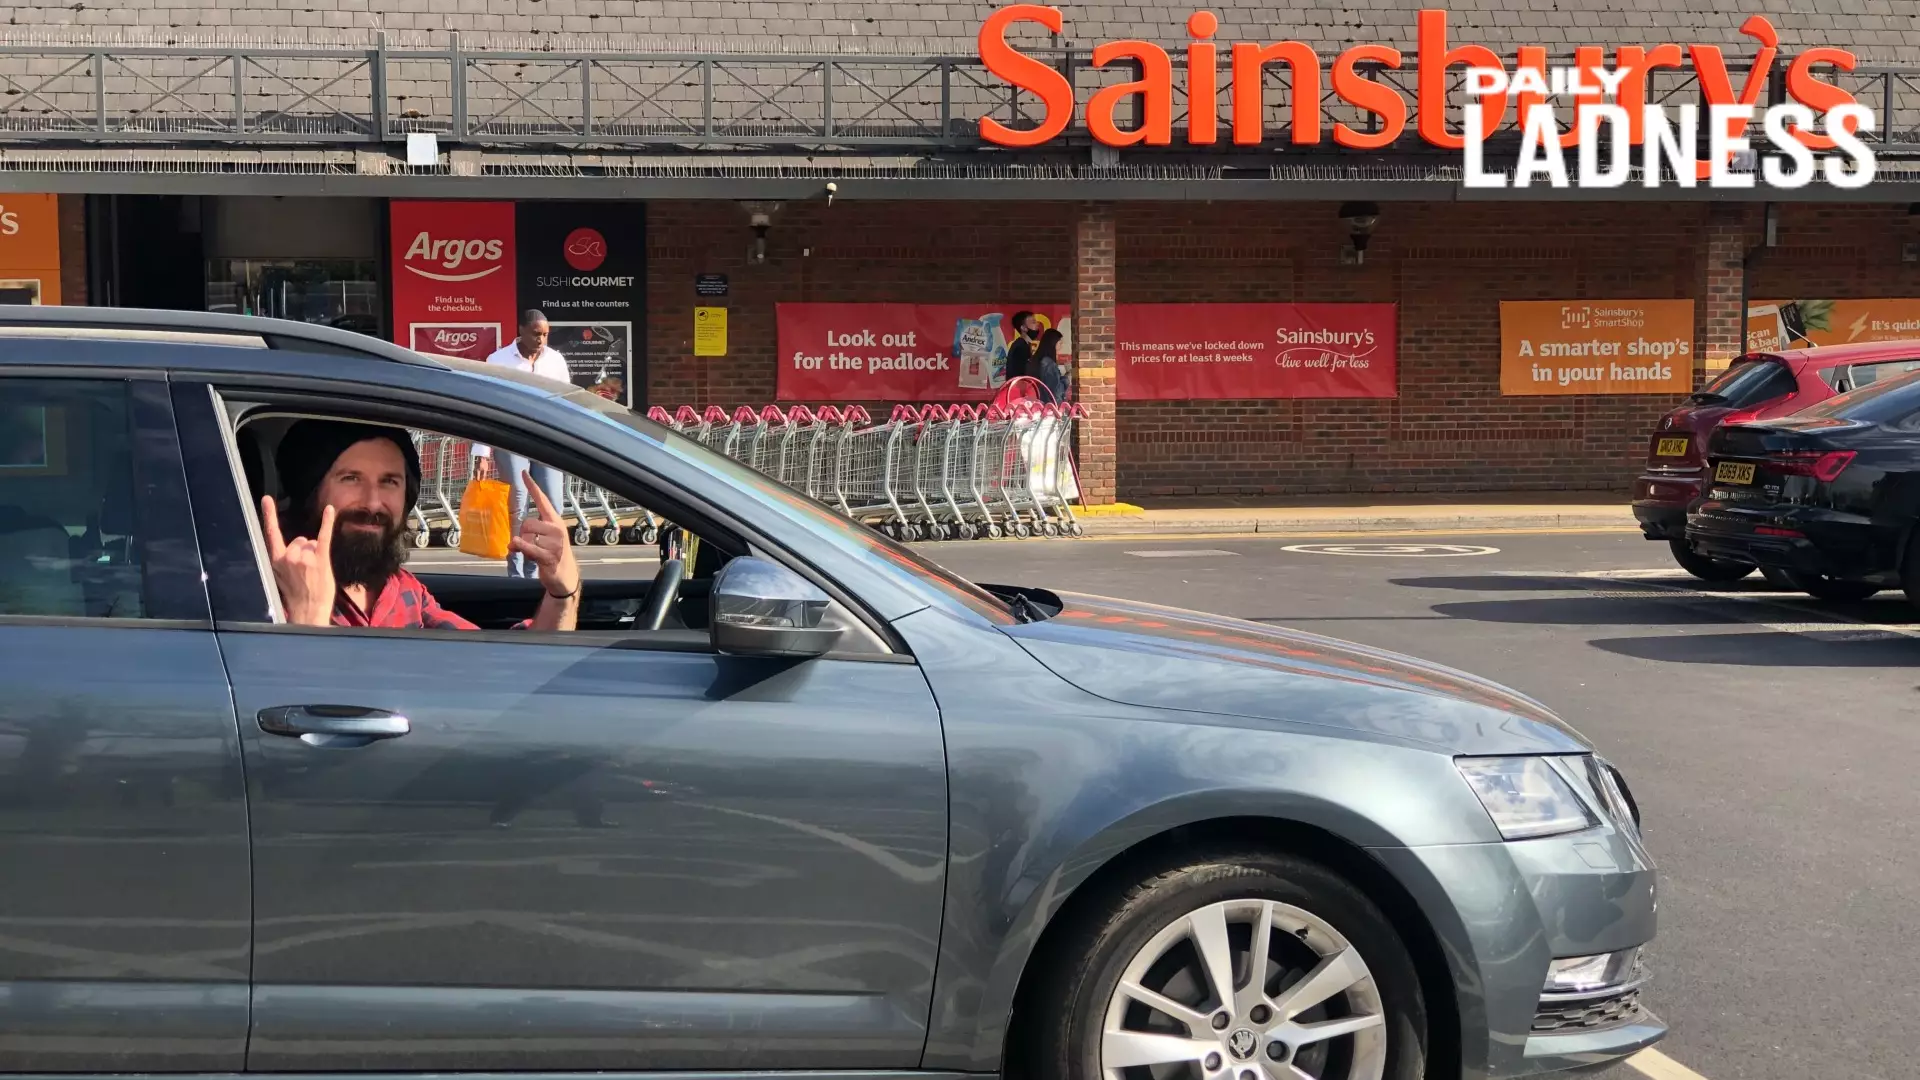 Man Completes Six-Year Mission To Park In All 211 Spaces At Local Sainsbury's